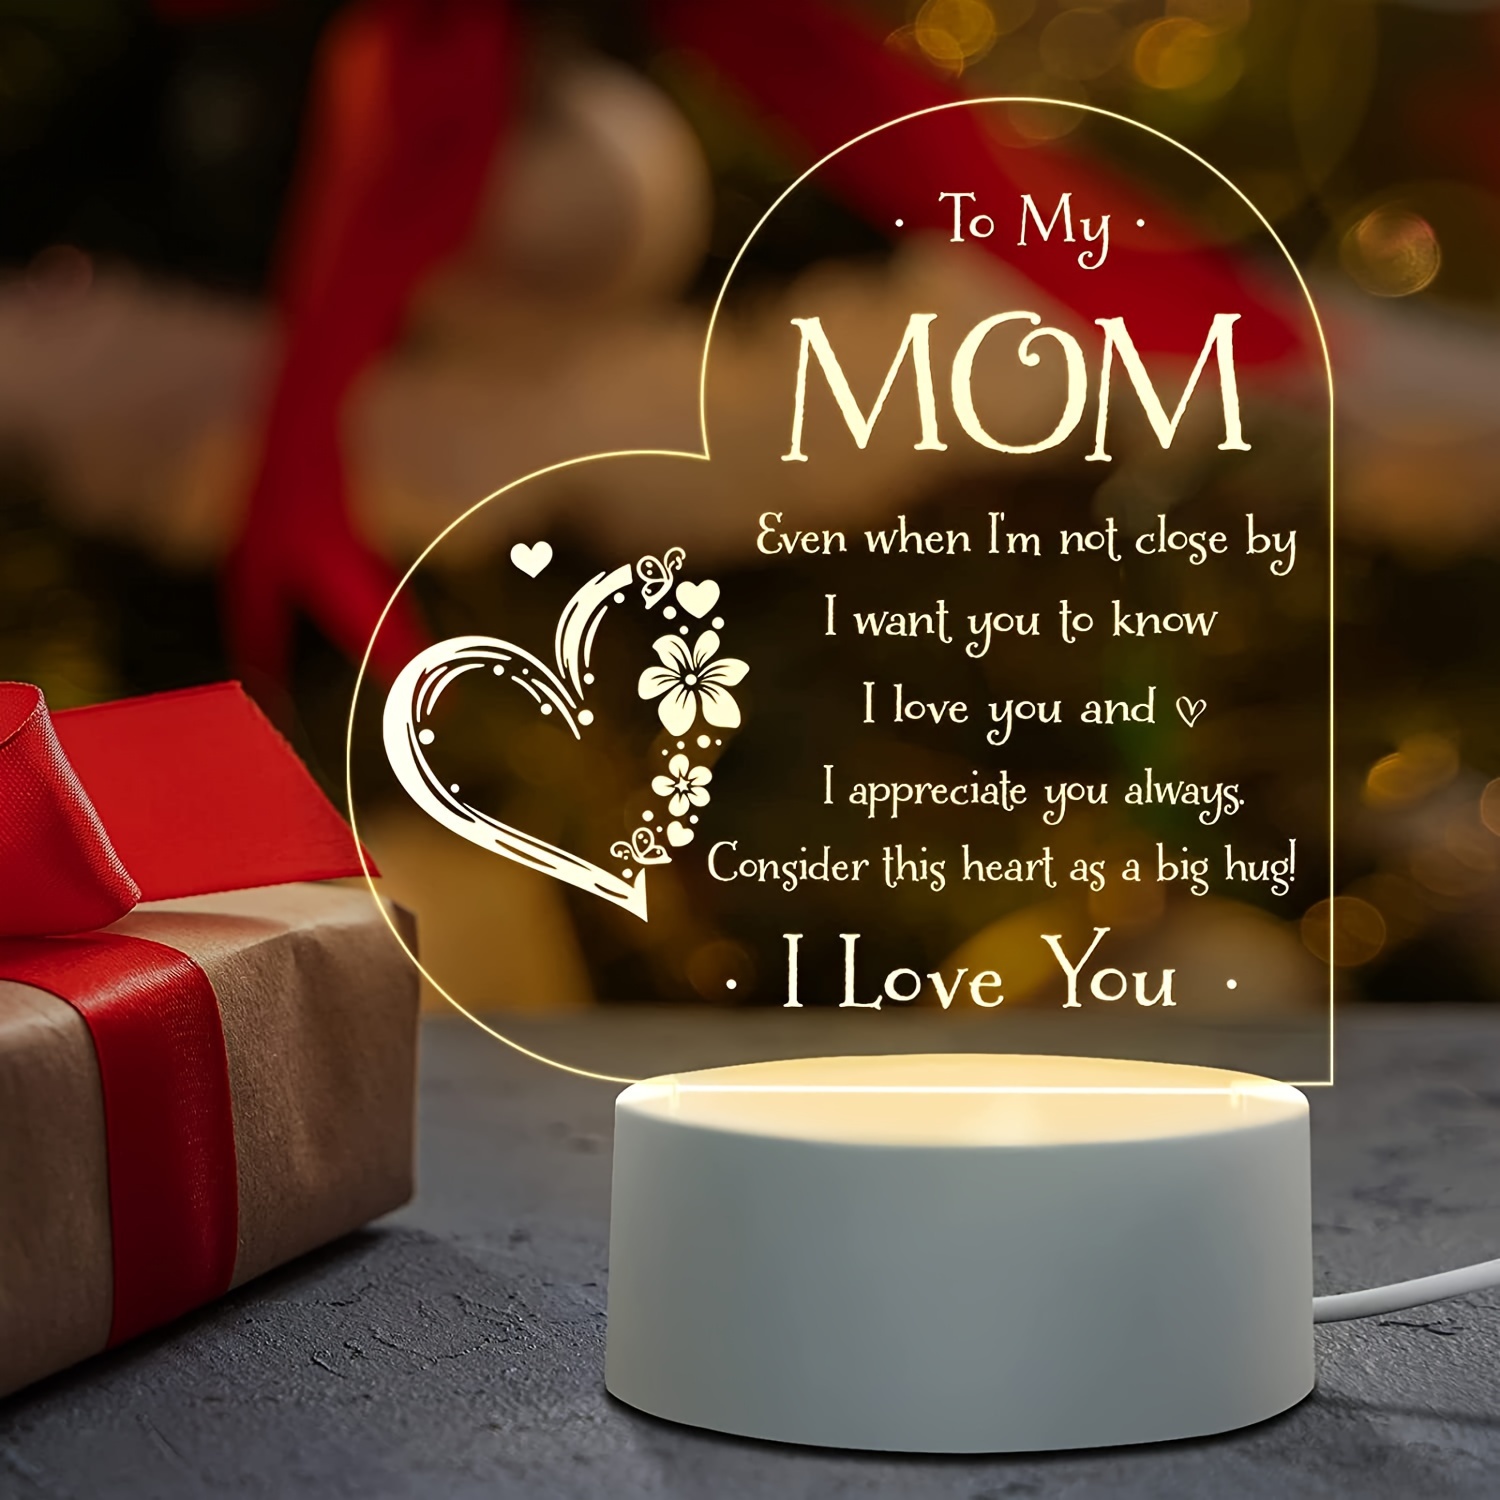 Gifts for Mom from Daughter Son, Mom Birthday Gifts for Mother